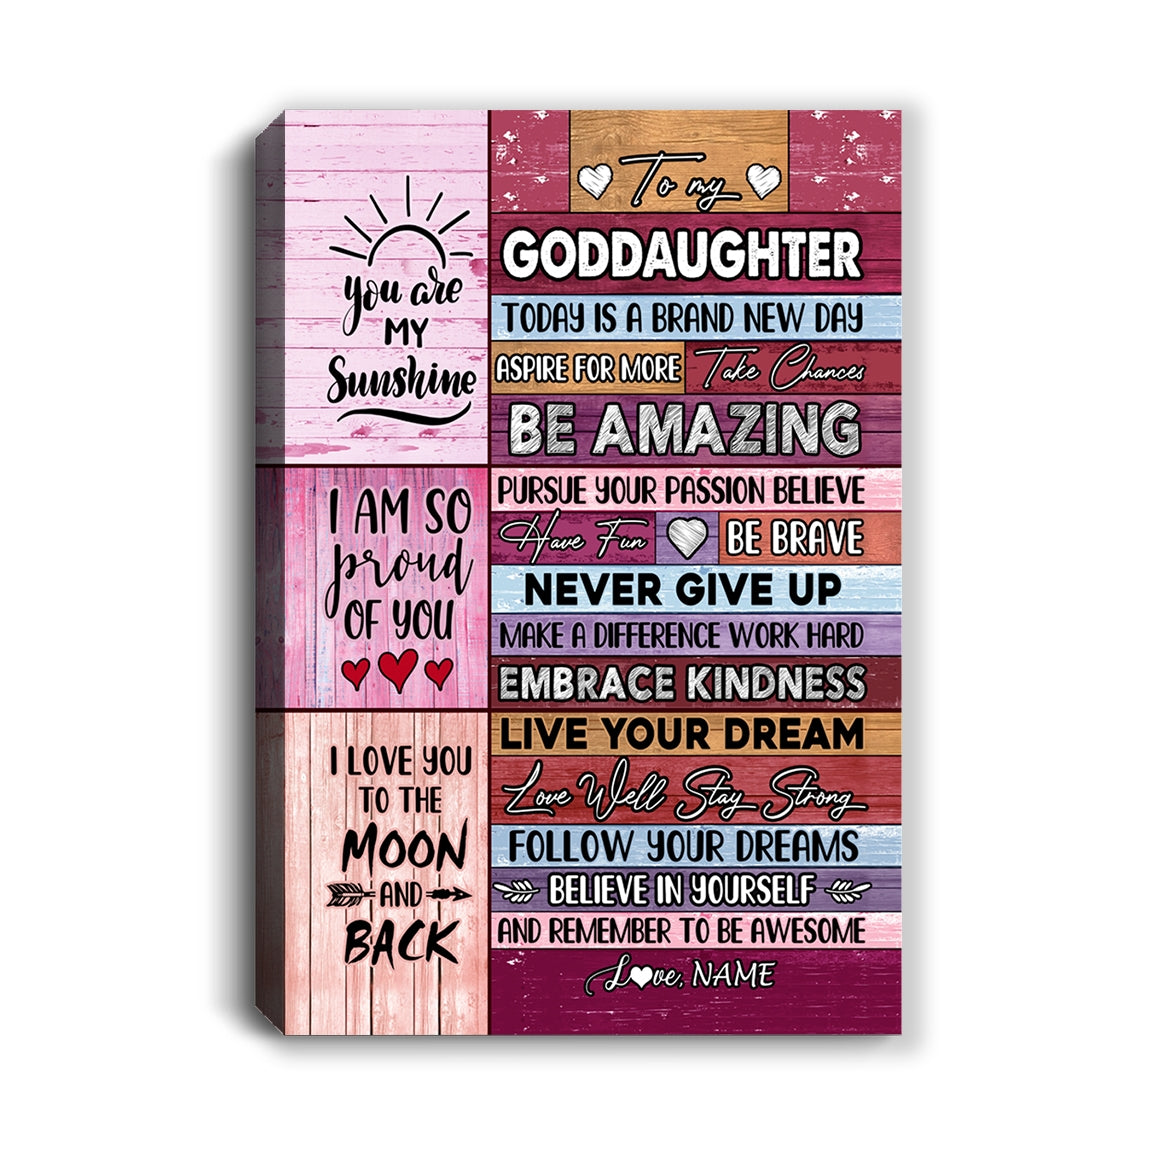 Personalized_To_My_Goddaughter_Canvas_From_Godmother_Never_Give_Up_Live_Your_Dream_Pink_Wood_Goddaughter_Birthday_Christmas_Custom_Wall_Art_Print_Home_Decor_Framed_Canvas_Canvas_mocku-1.jpg